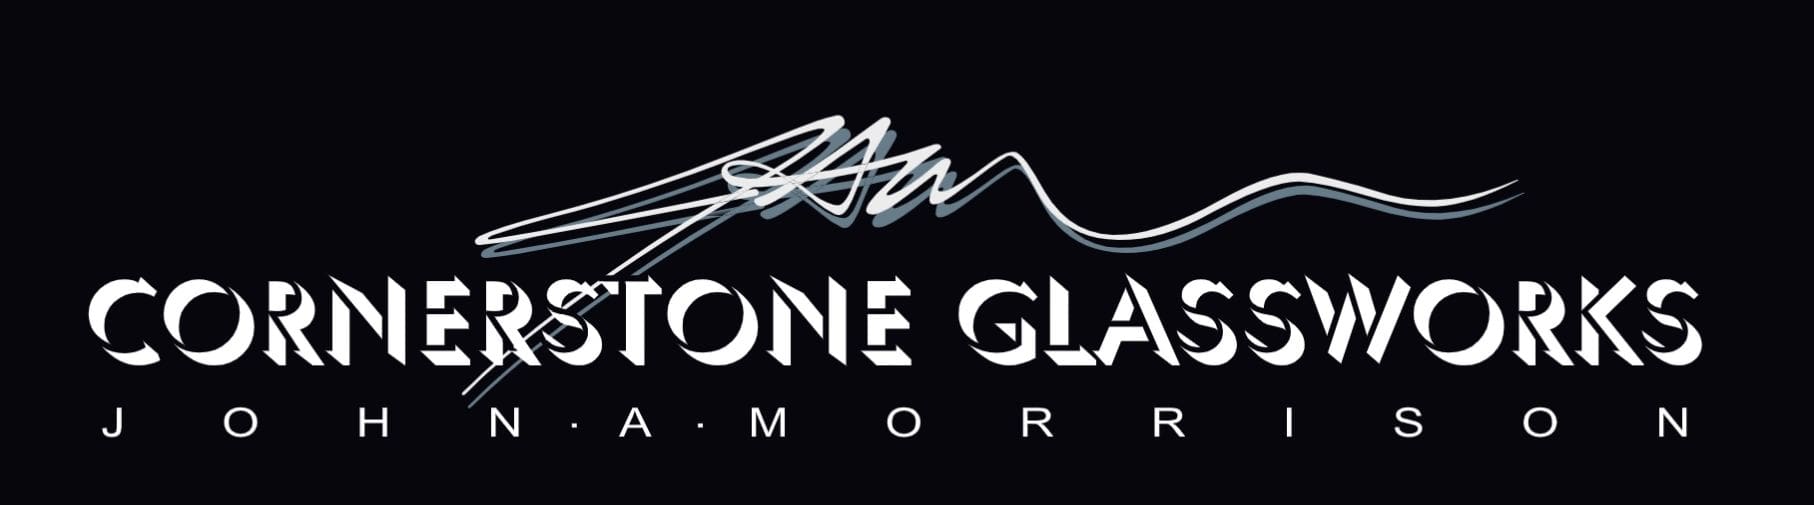 A black and white logo of stone glass.